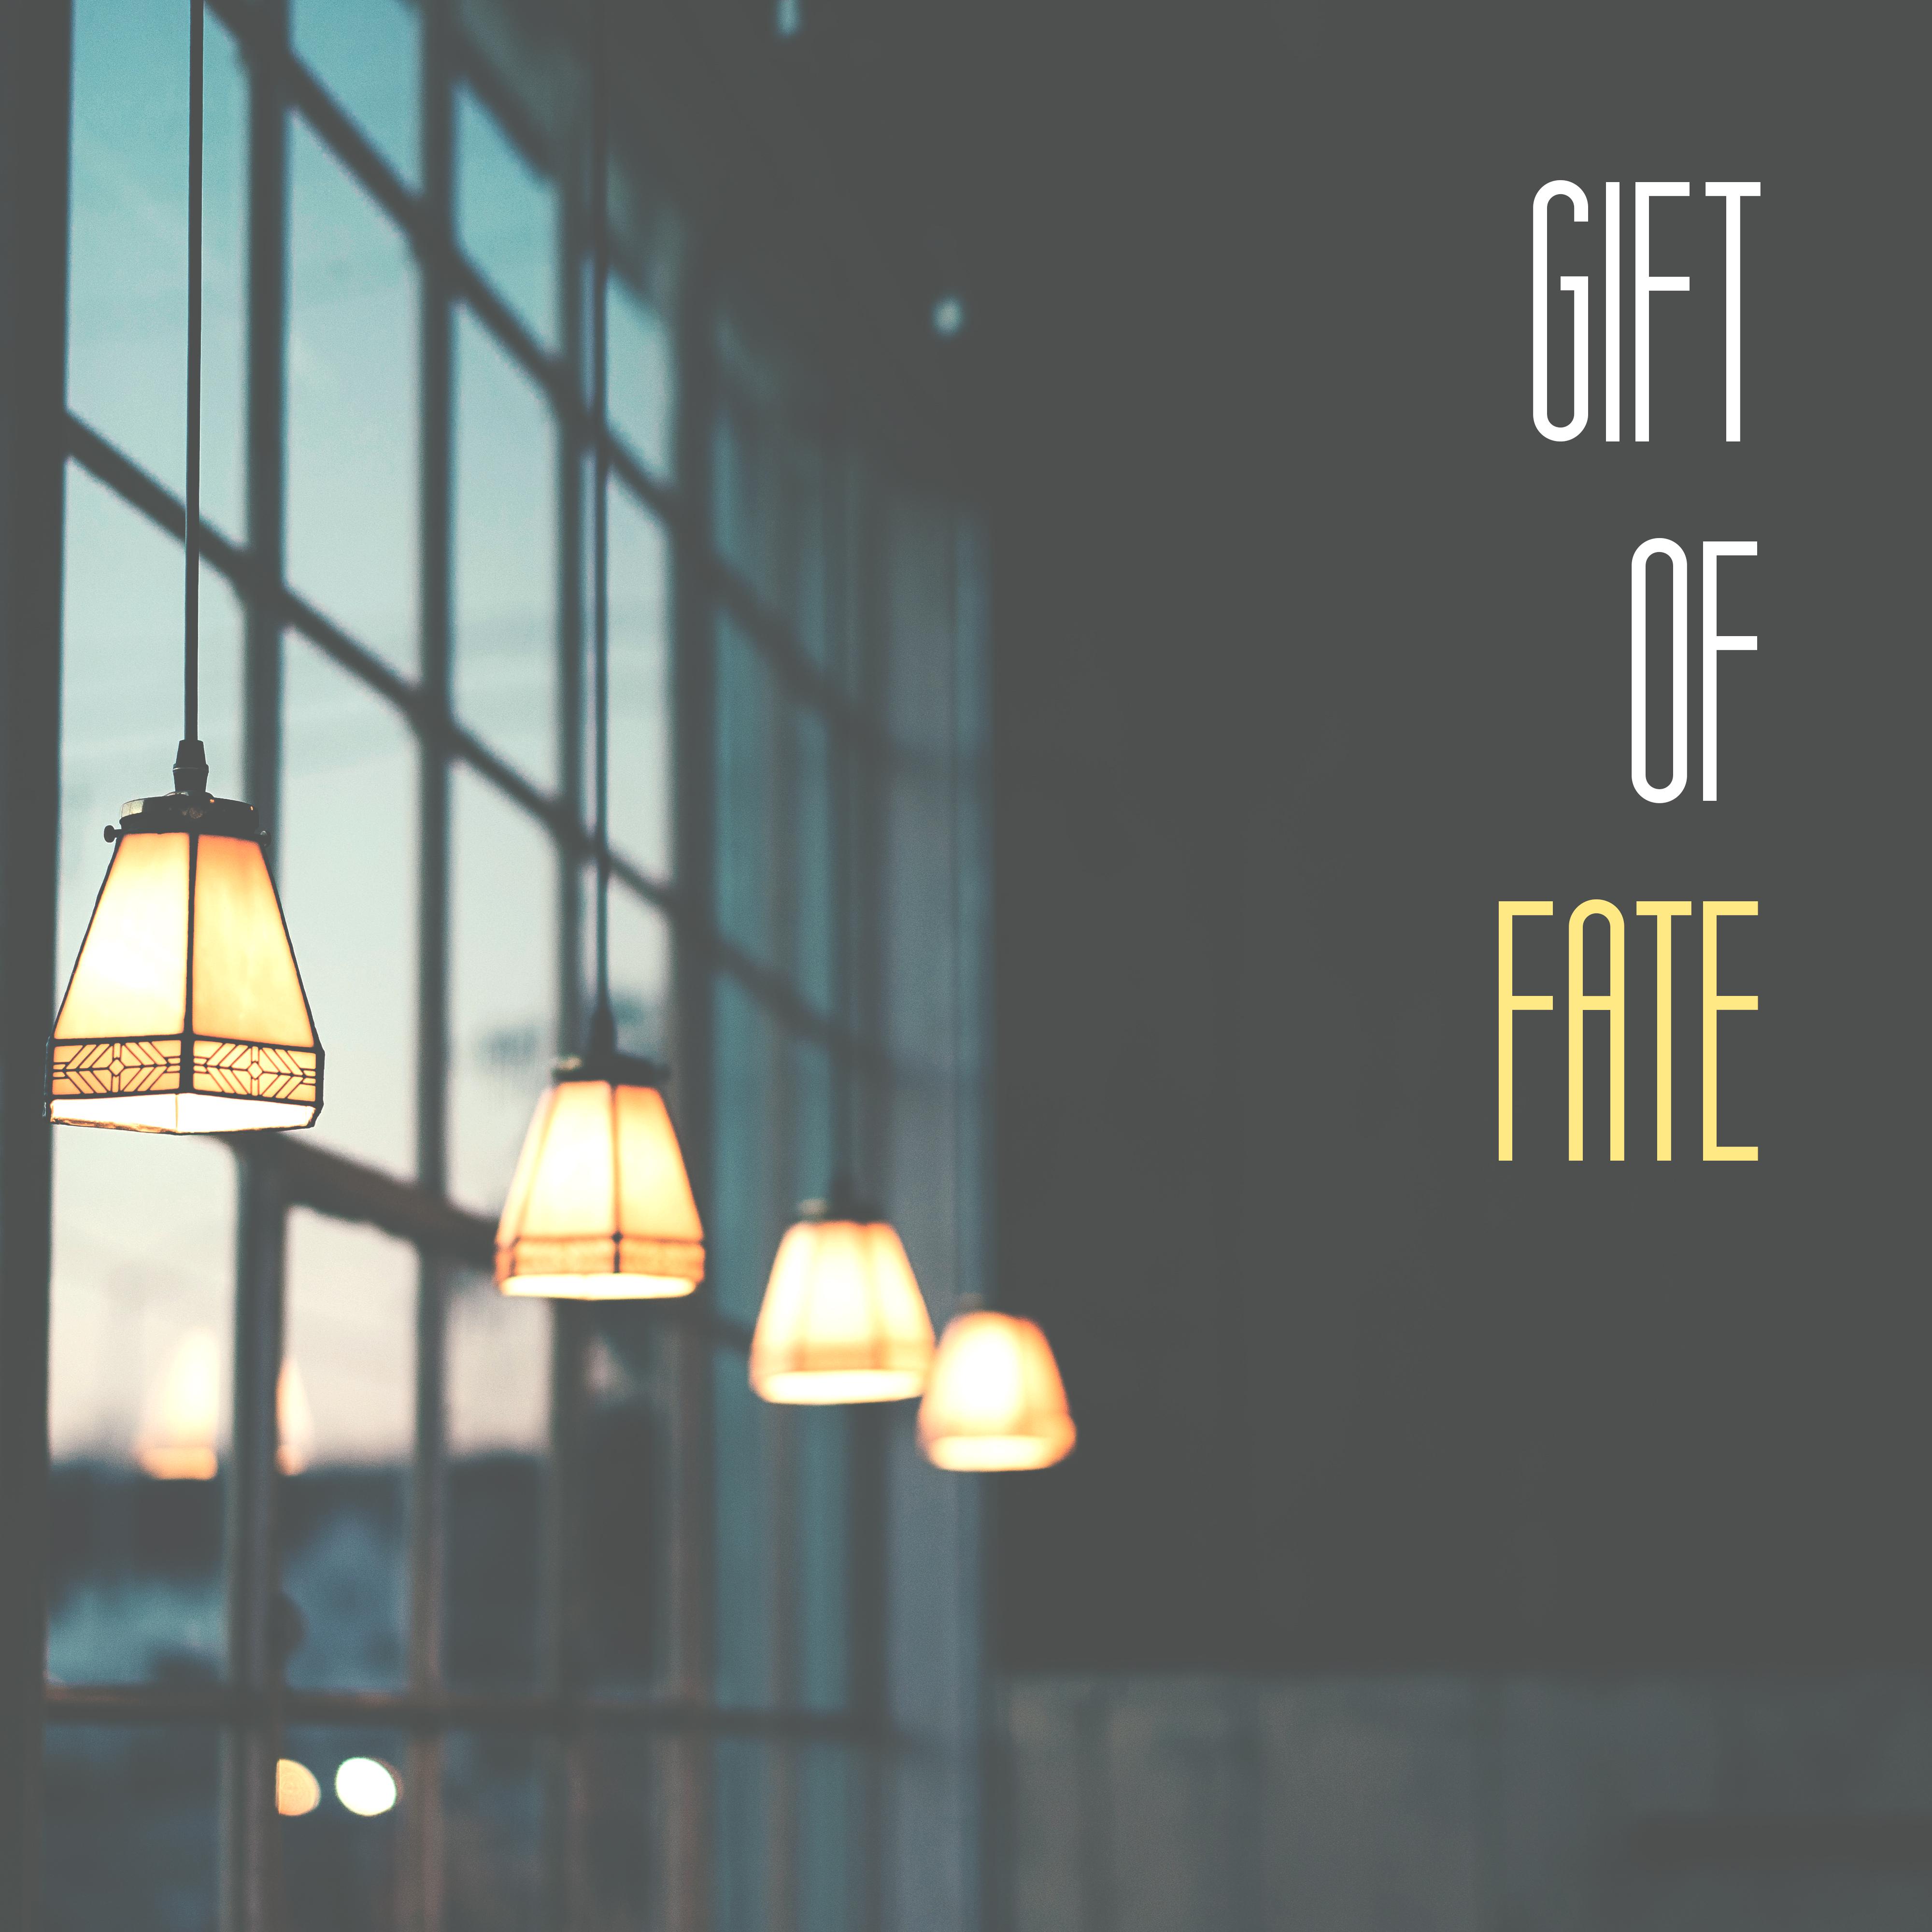 Gift of Fate - Sweet Music, Good Mood, Nice Time, with Friends